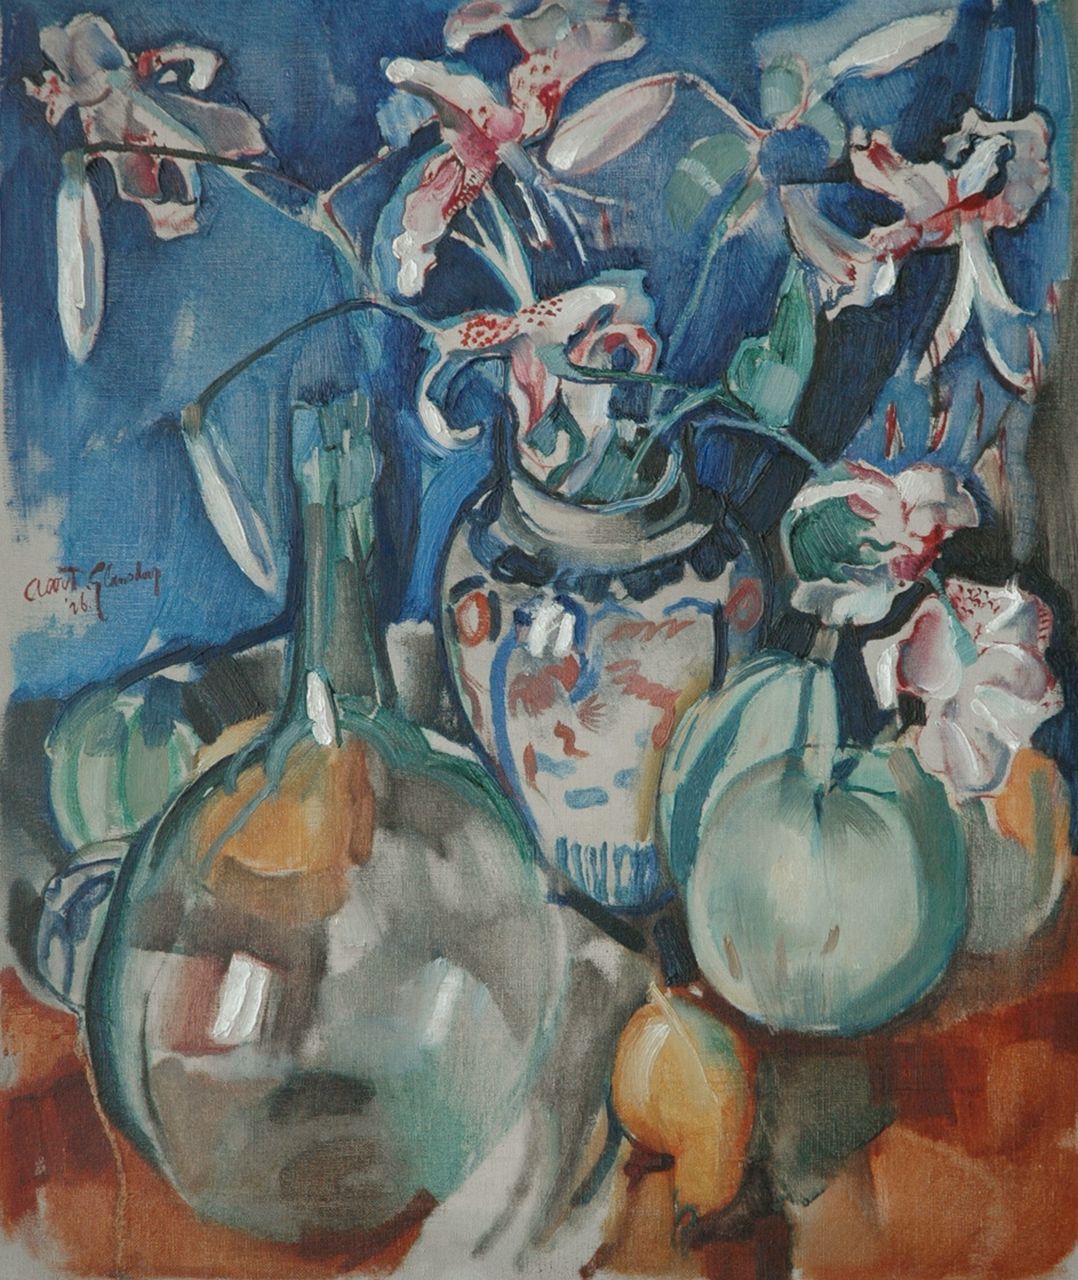 Glansdorp A.  | Aart Glansdorp, Orchids in an oriental vase, oil on canvas 65.8 x 55.6 cm, signed c.l. and dated '26